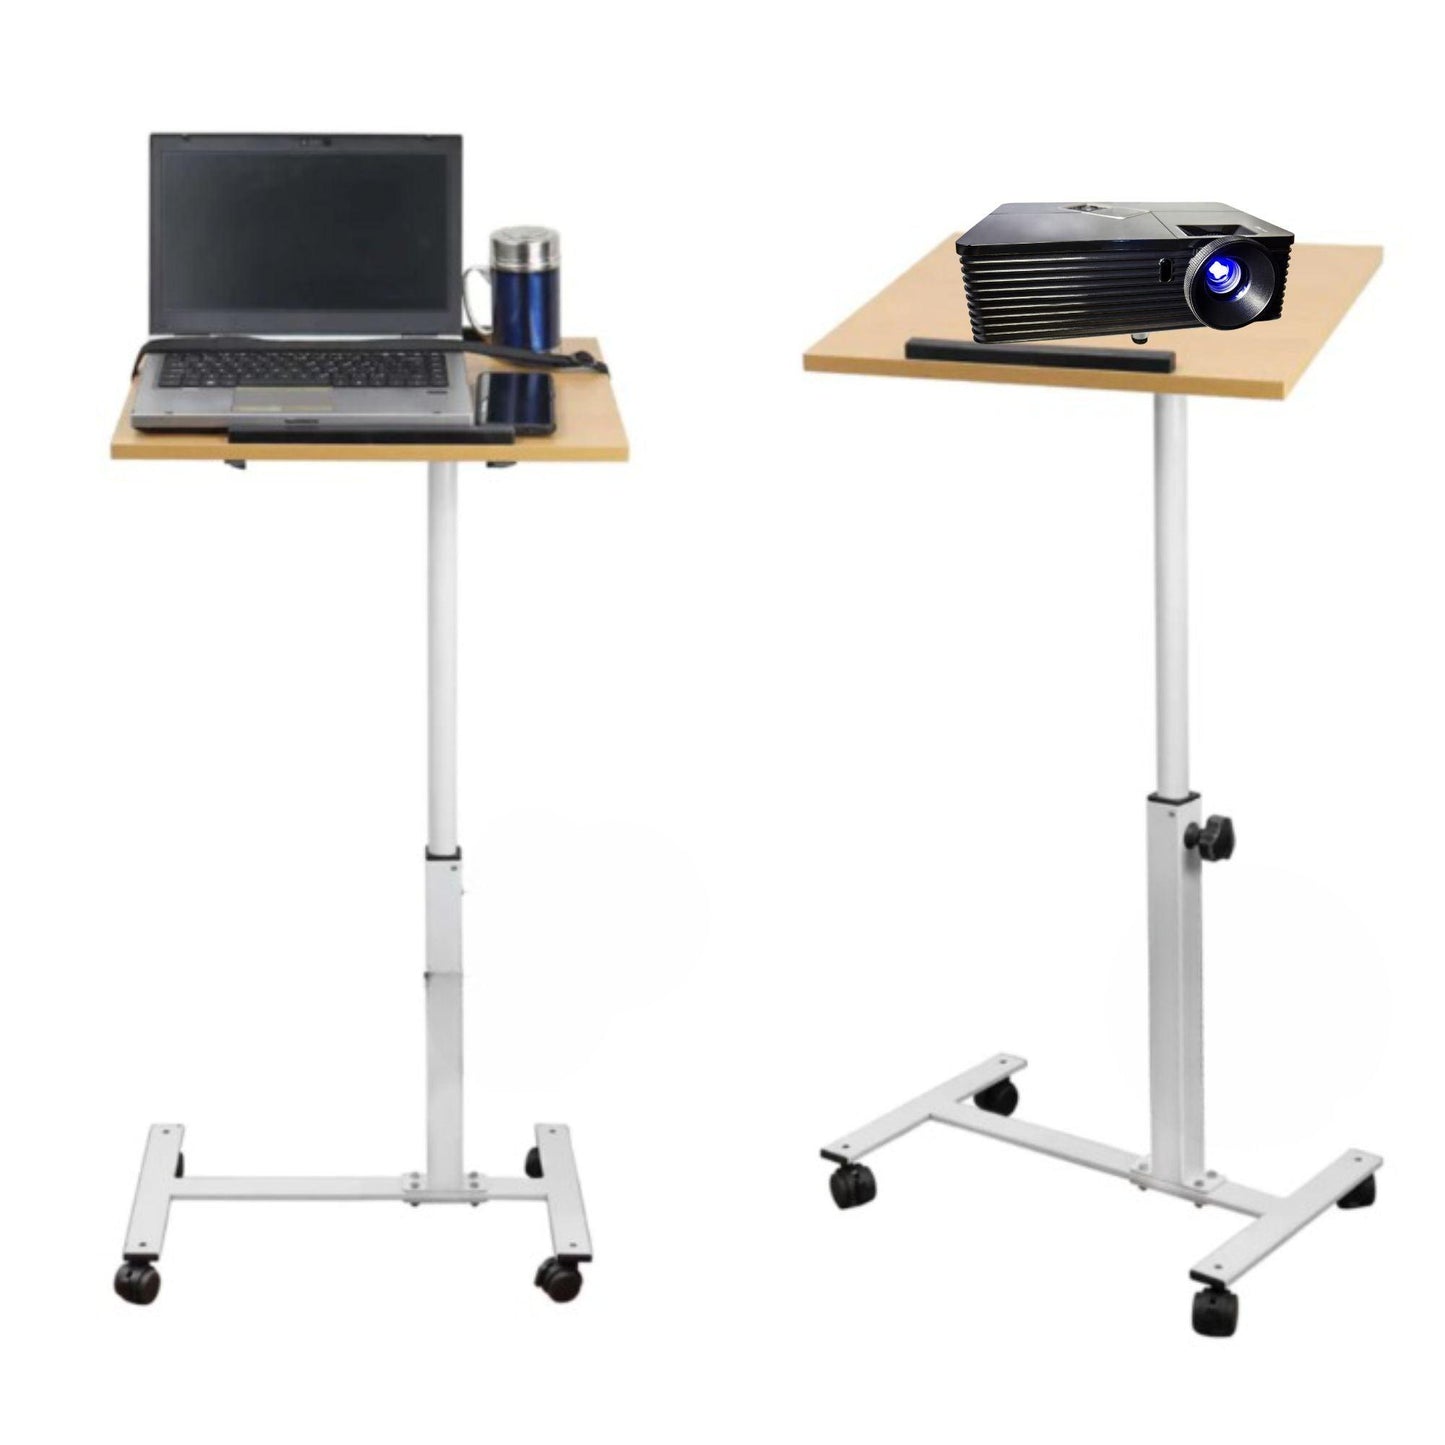 Laptop Projector Study Table Desk with Wheels Adjustable Height and Angle Wood - GADGET WAGON